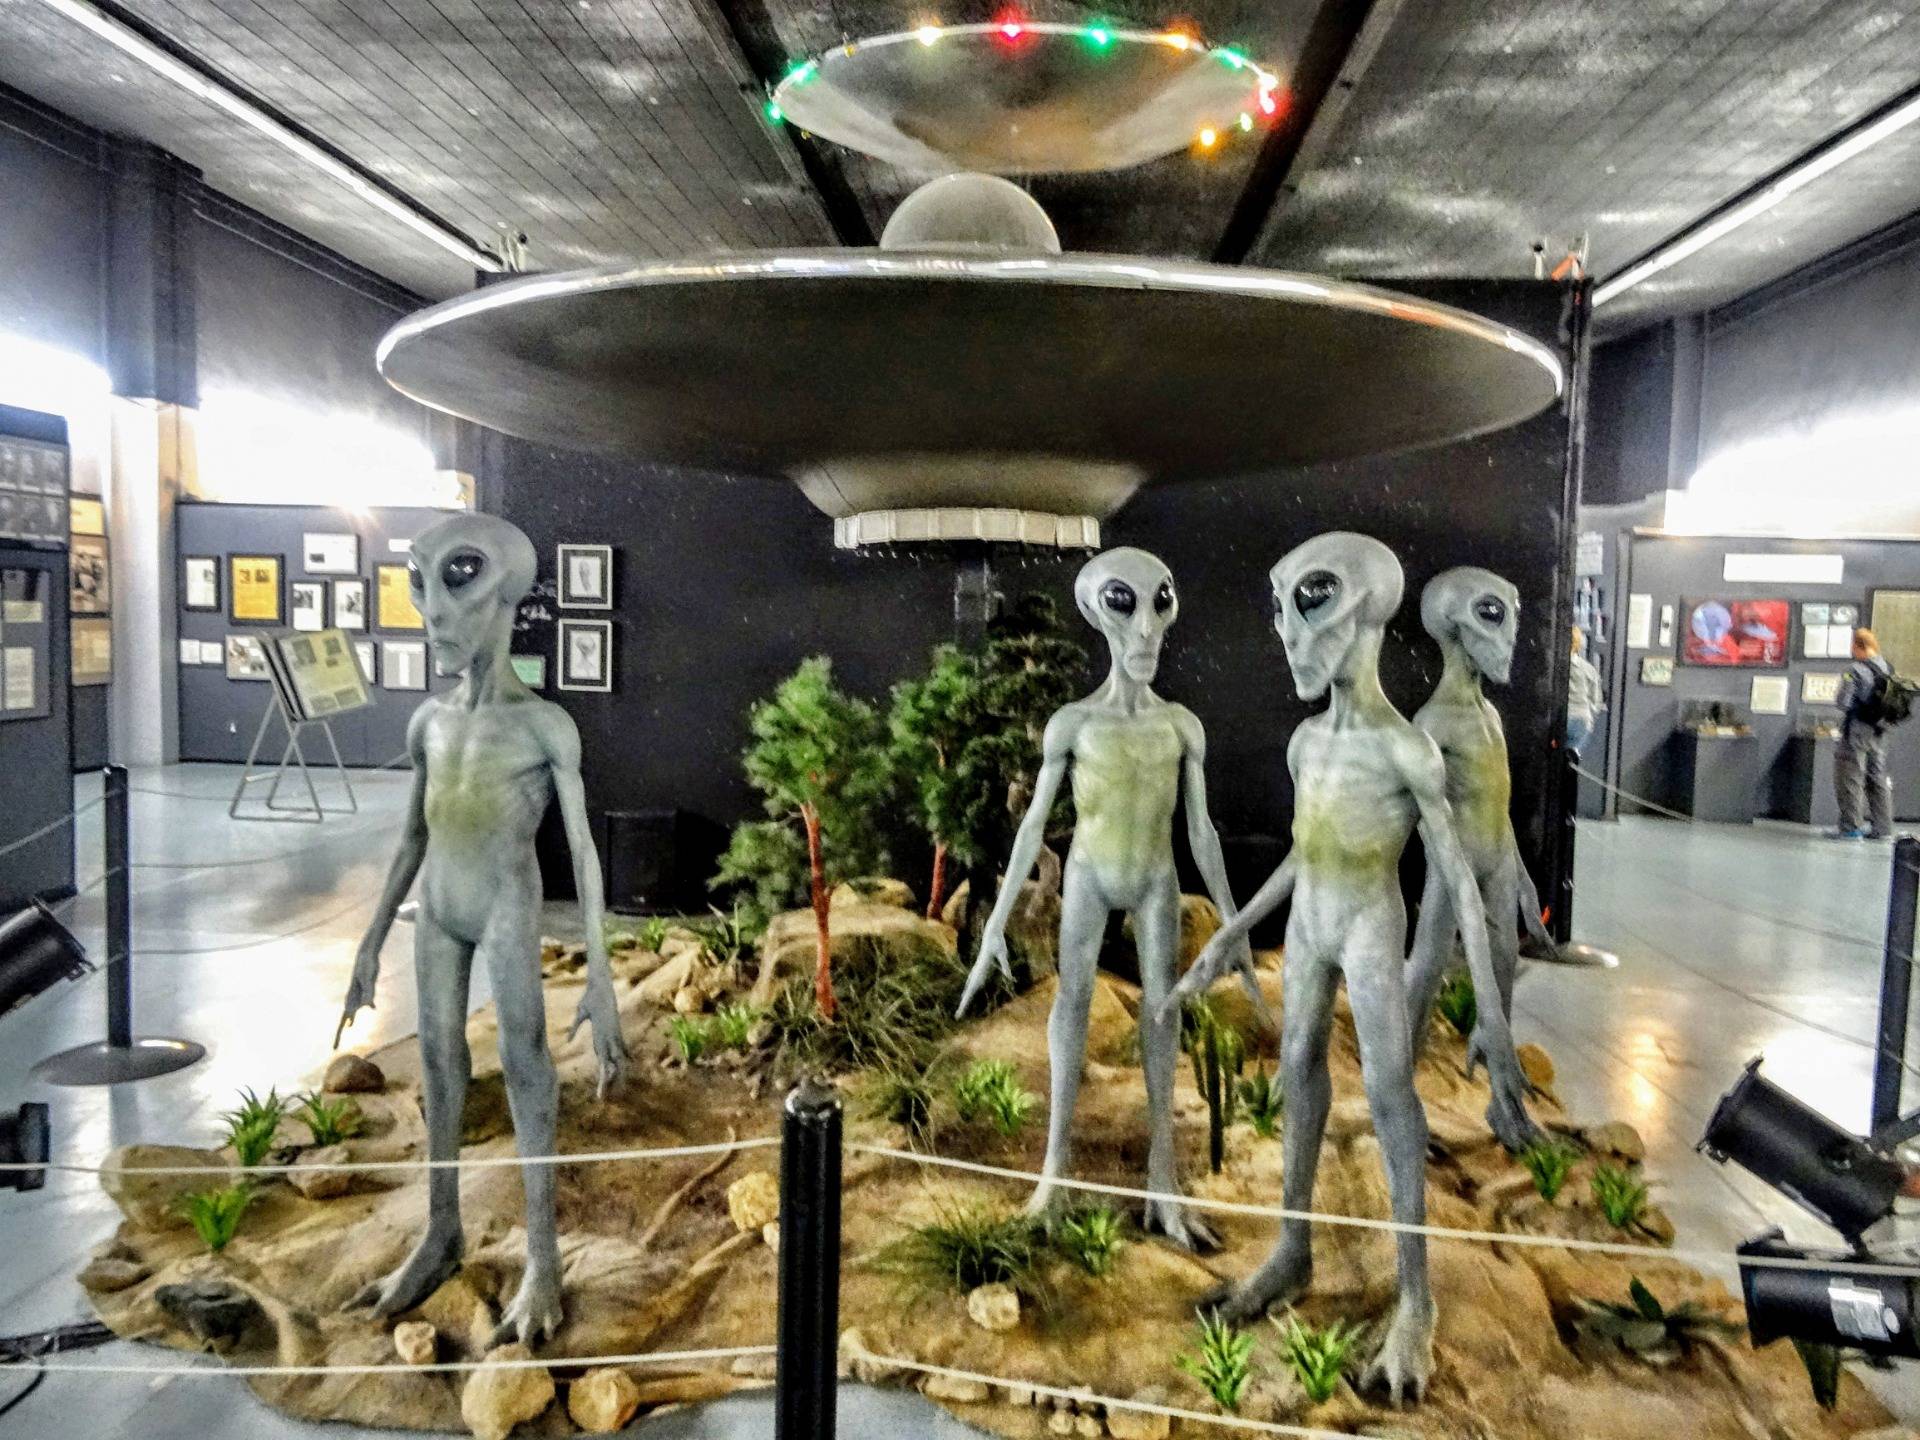 Just landed: Of course in Roswell.